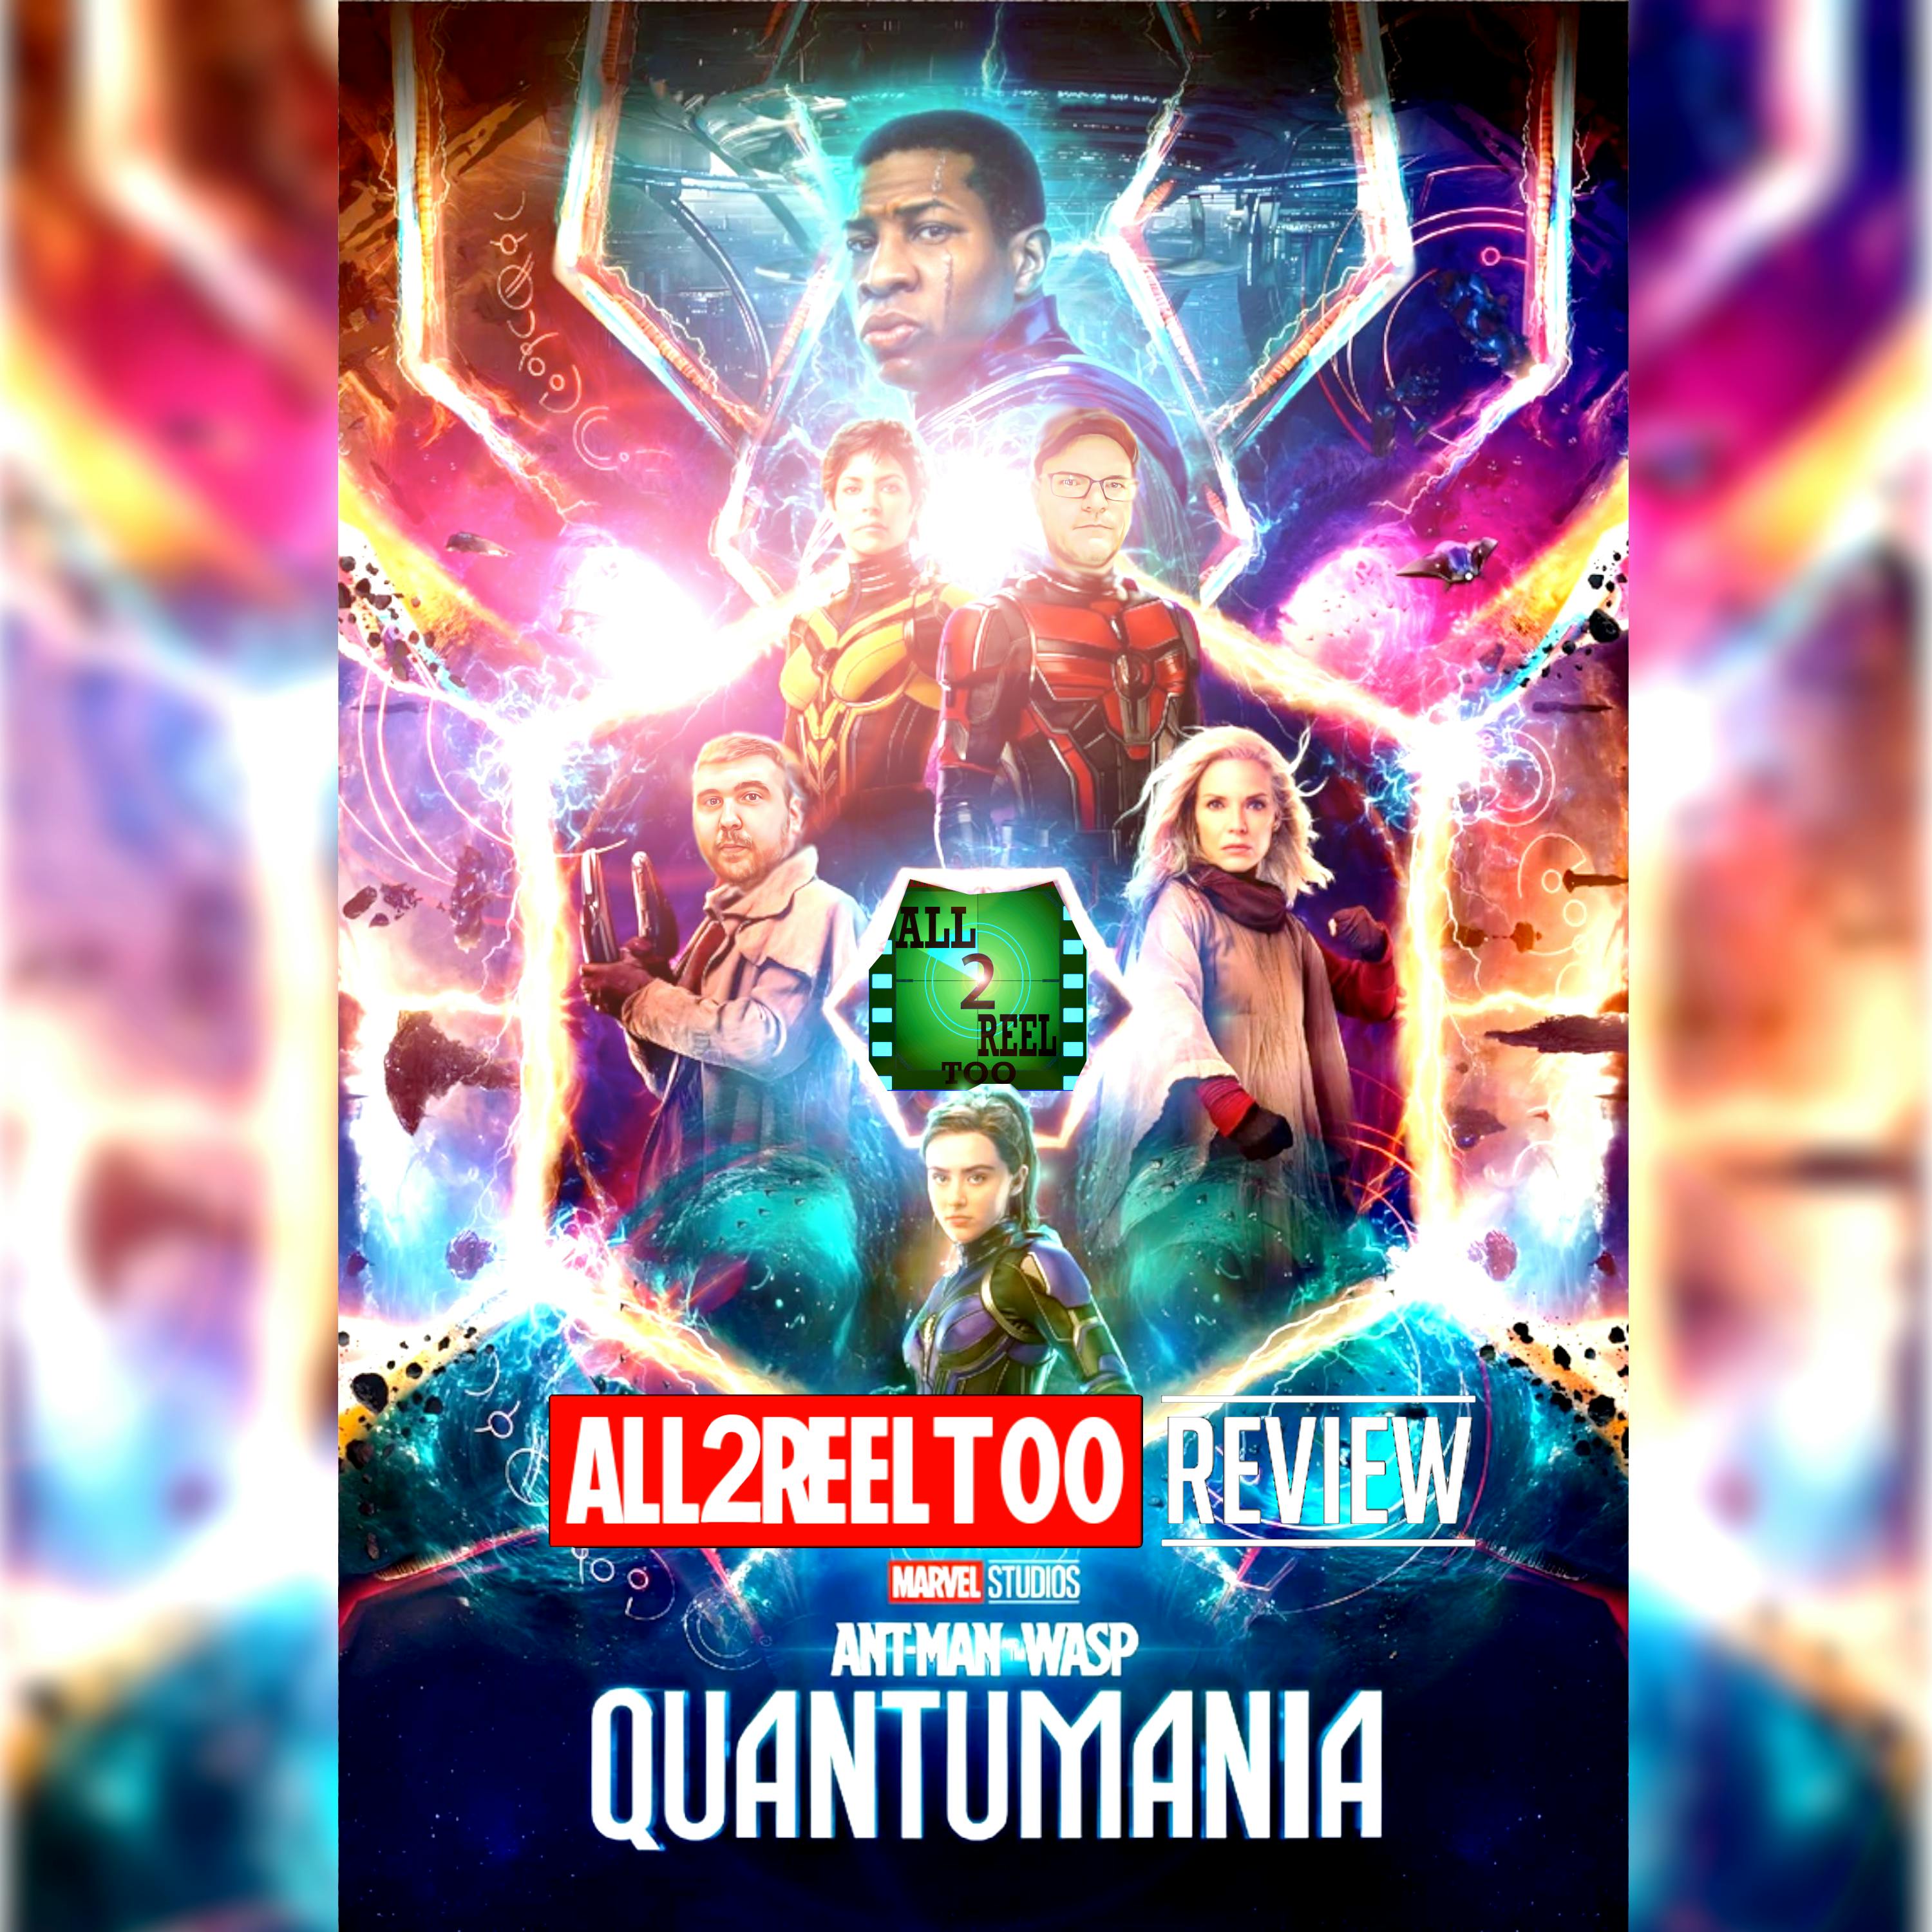 Ant-Man and the Wasp: Quantumania (2023) Spoiler-Filled Review And Breakdown